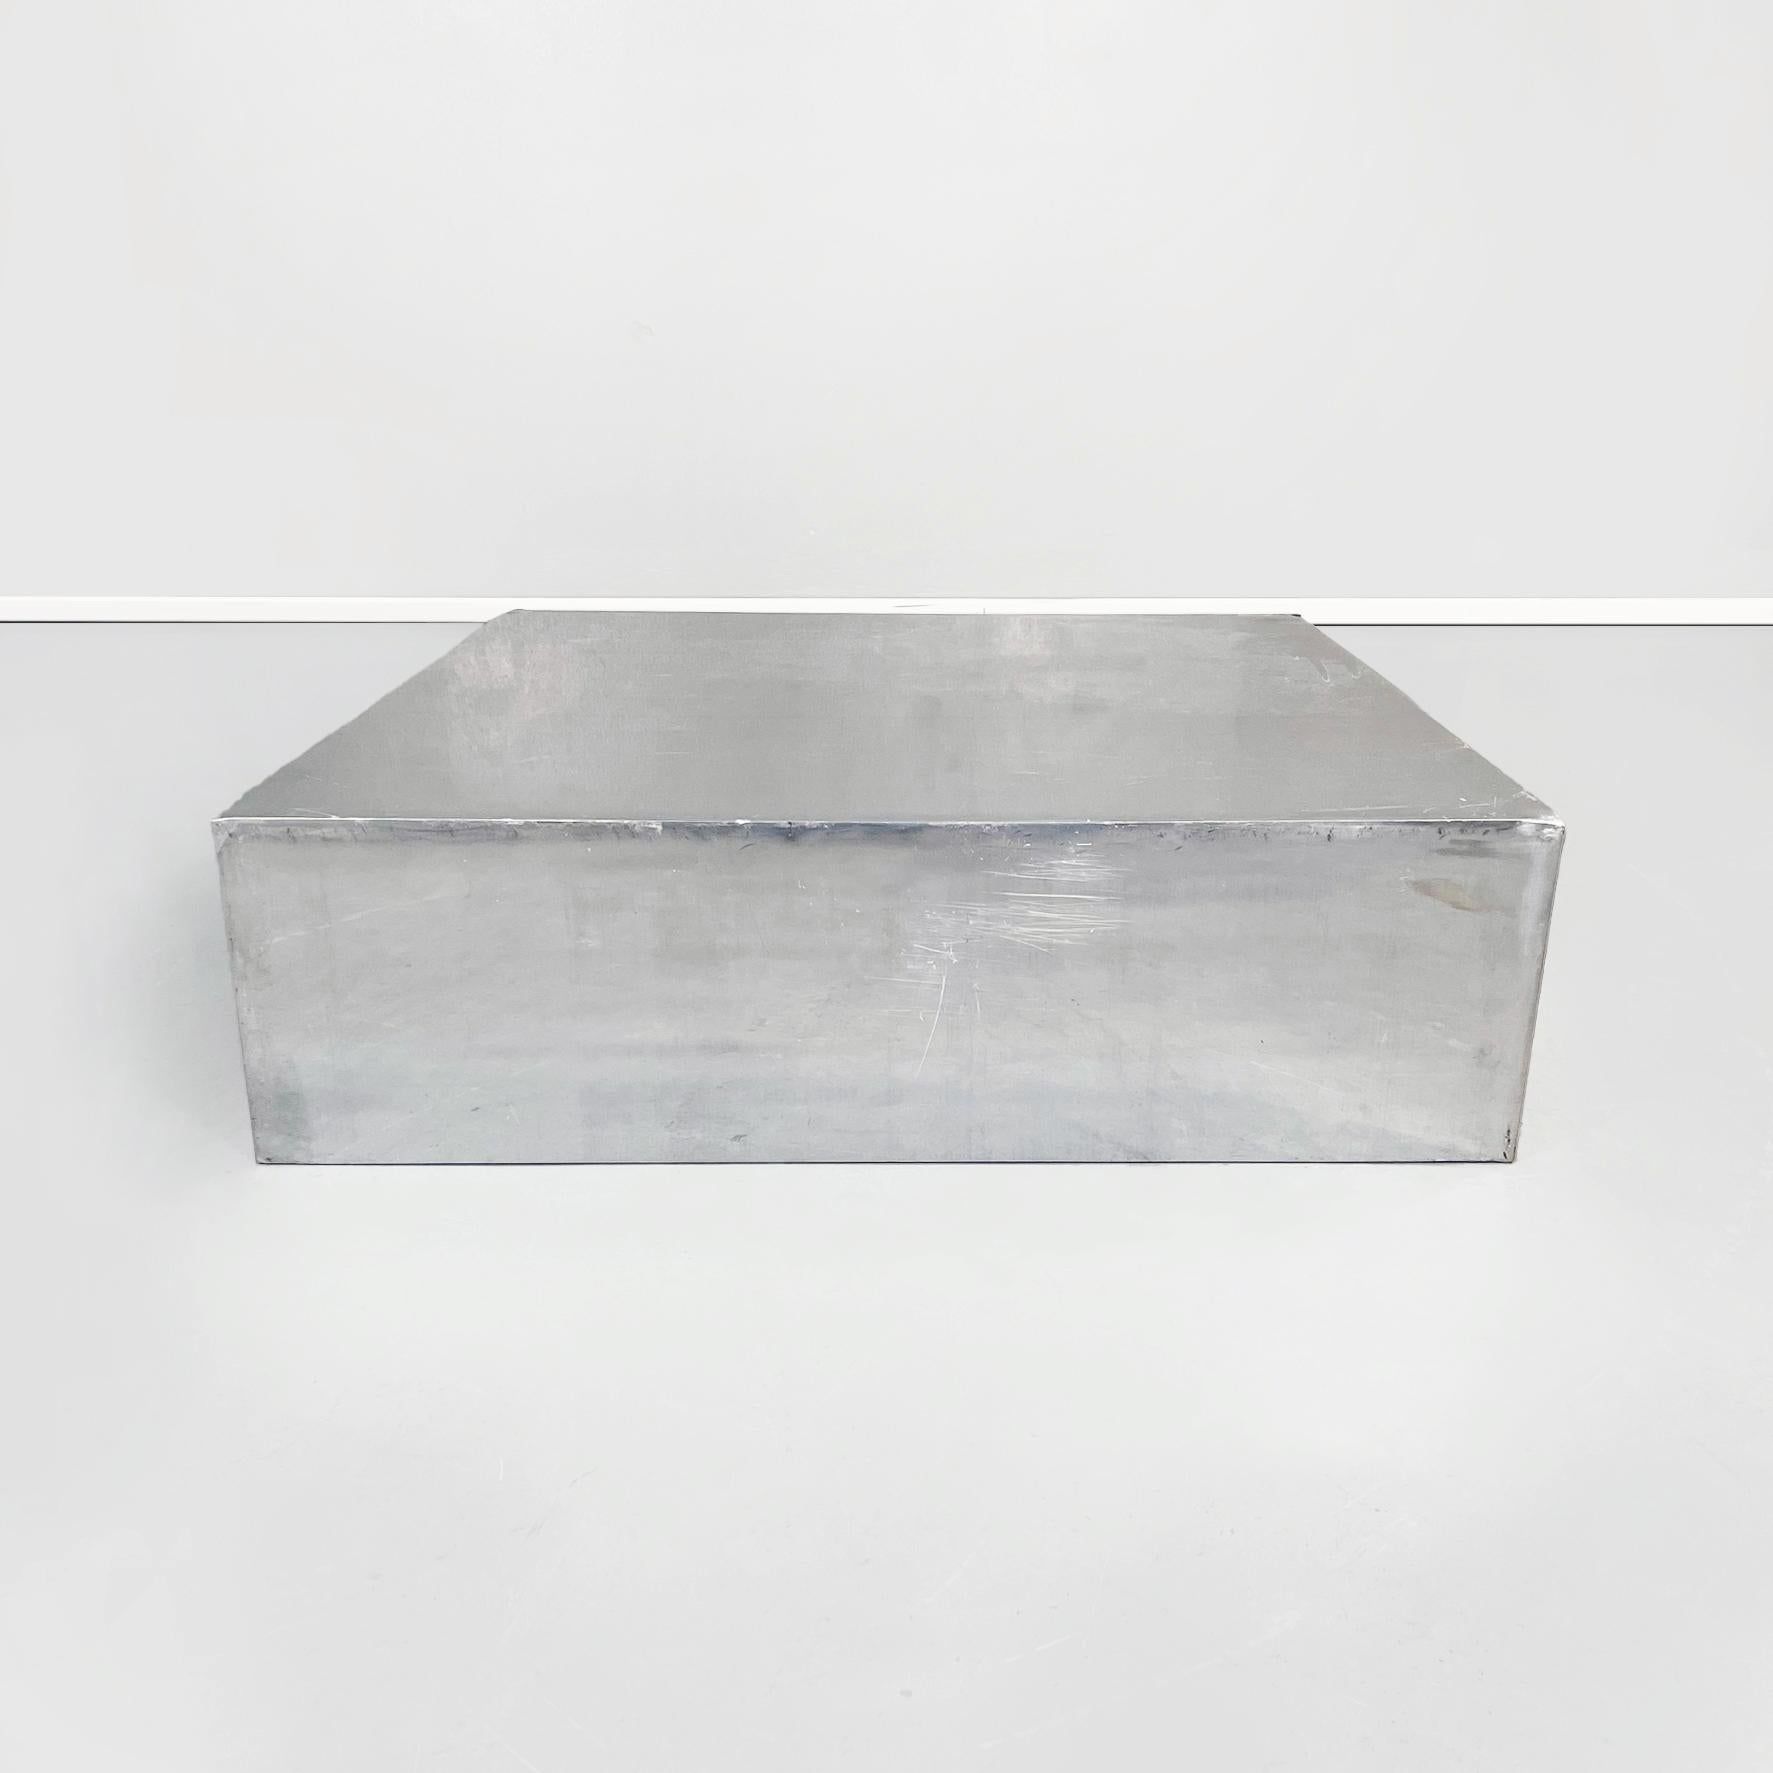 Italian Mid-Century Modern Mirrored aluminum coffee table by Arrmet, 1970s
Square coffee table in mirrored aluminum. Inside it has a cross structure.
Produced by Arrmet Arredamenti Metallici Udine in 1970s.
Vintage conditions, scratches and marks